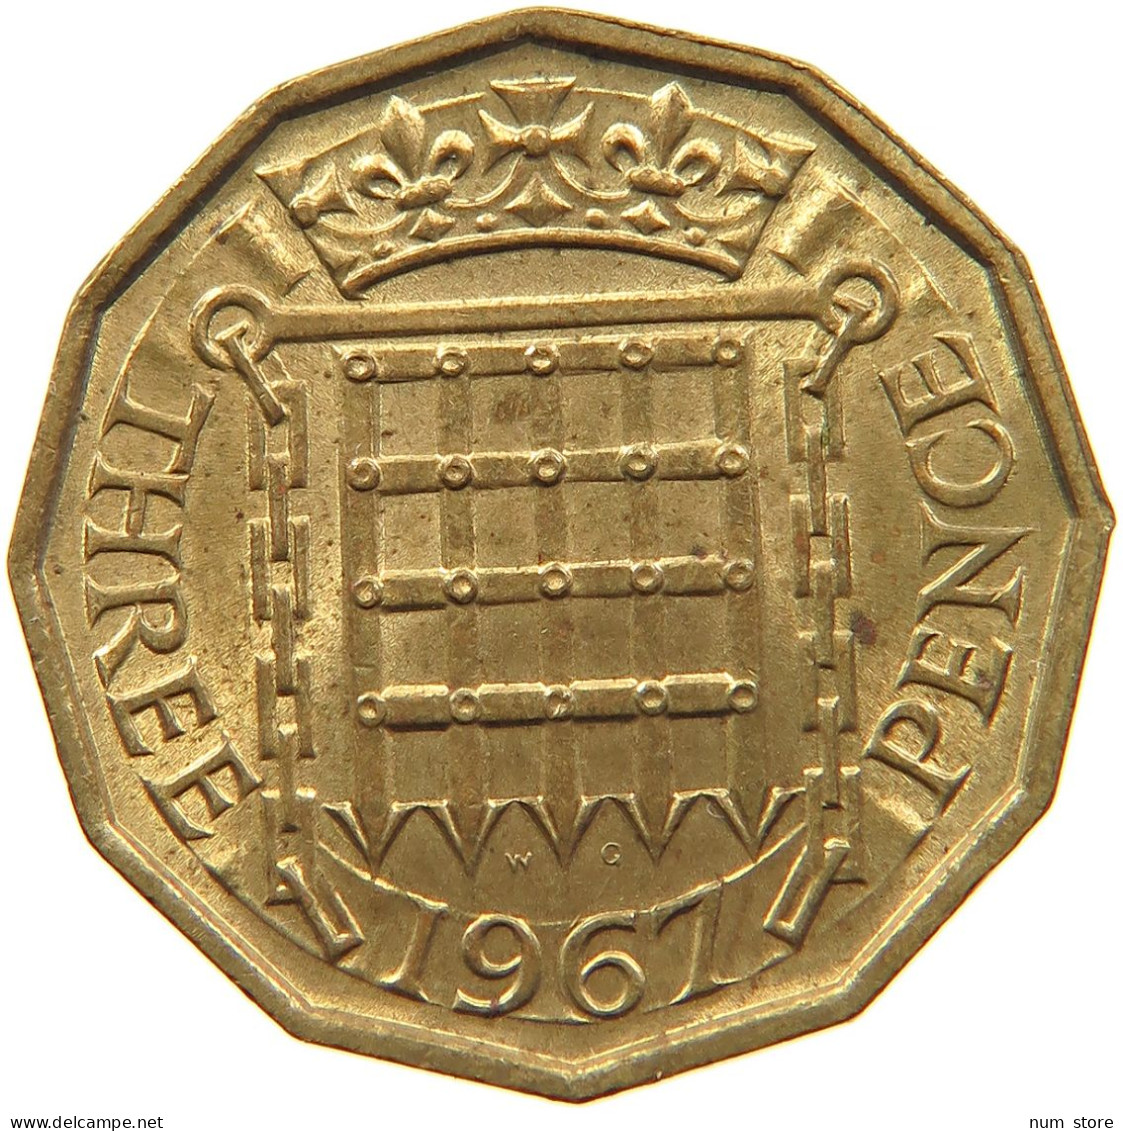 GREAT BRITAIN 3 PENCE 1967 #s089 0017 - F. 3 Pence